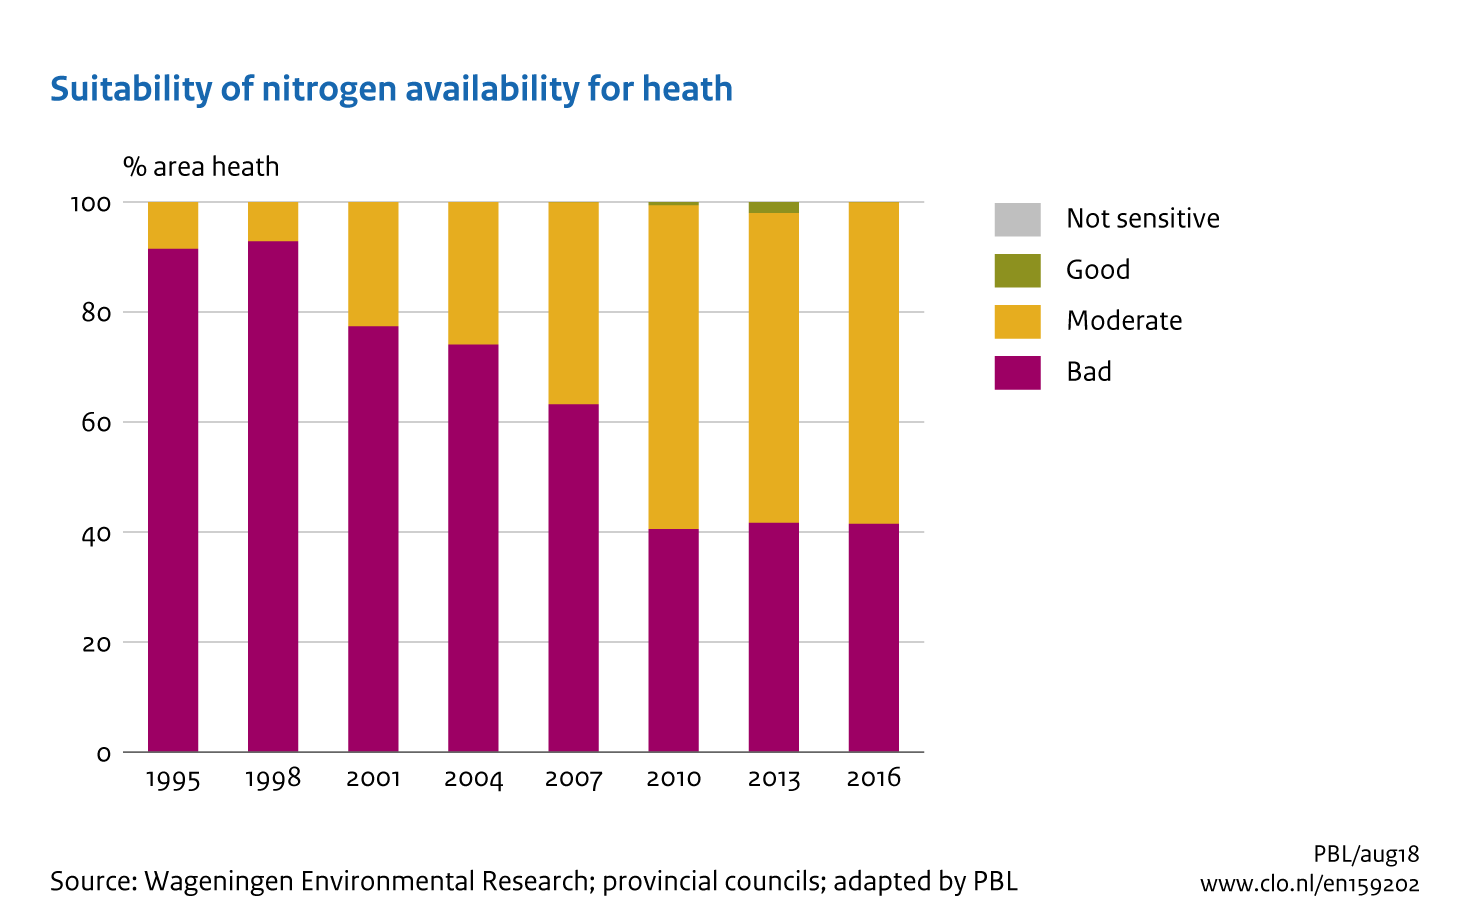 Image  Suitability of nitrogen availability for heath. The image is further explained in the text.